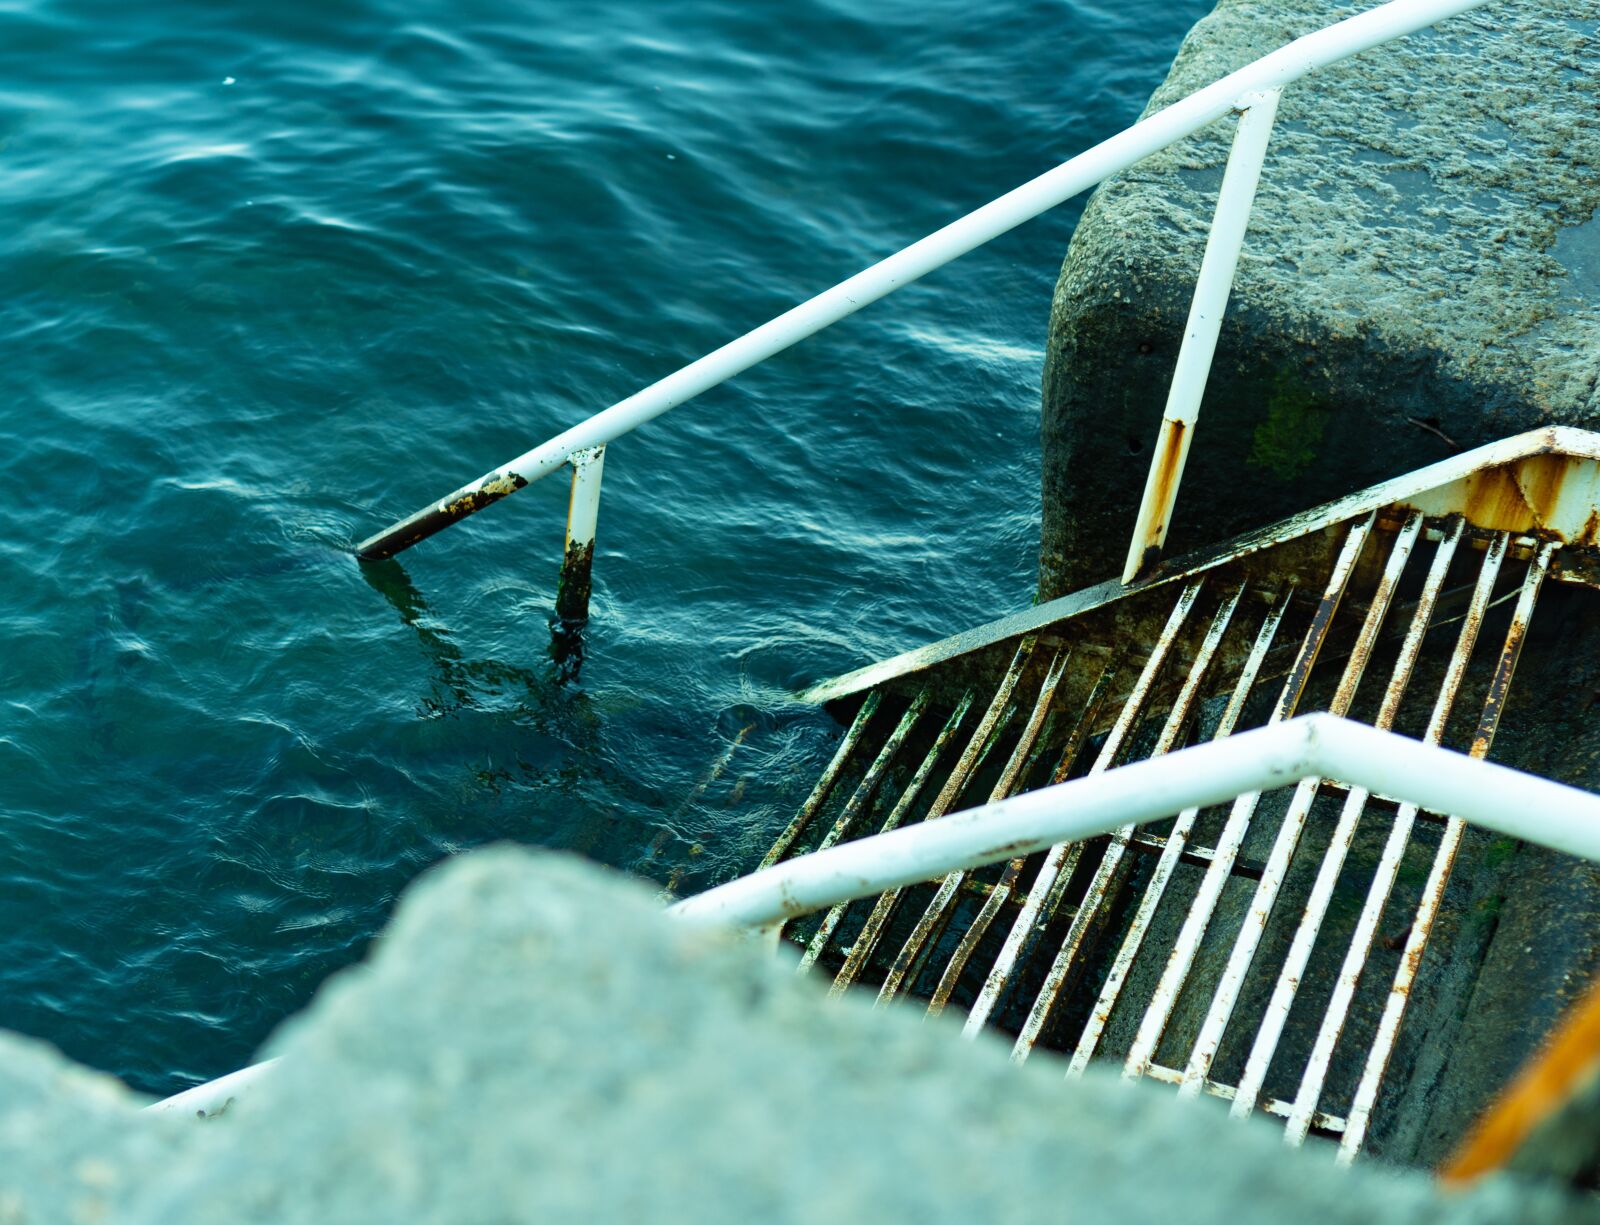 Sony a6400 sample photo. "Water, stairs, sea" photography